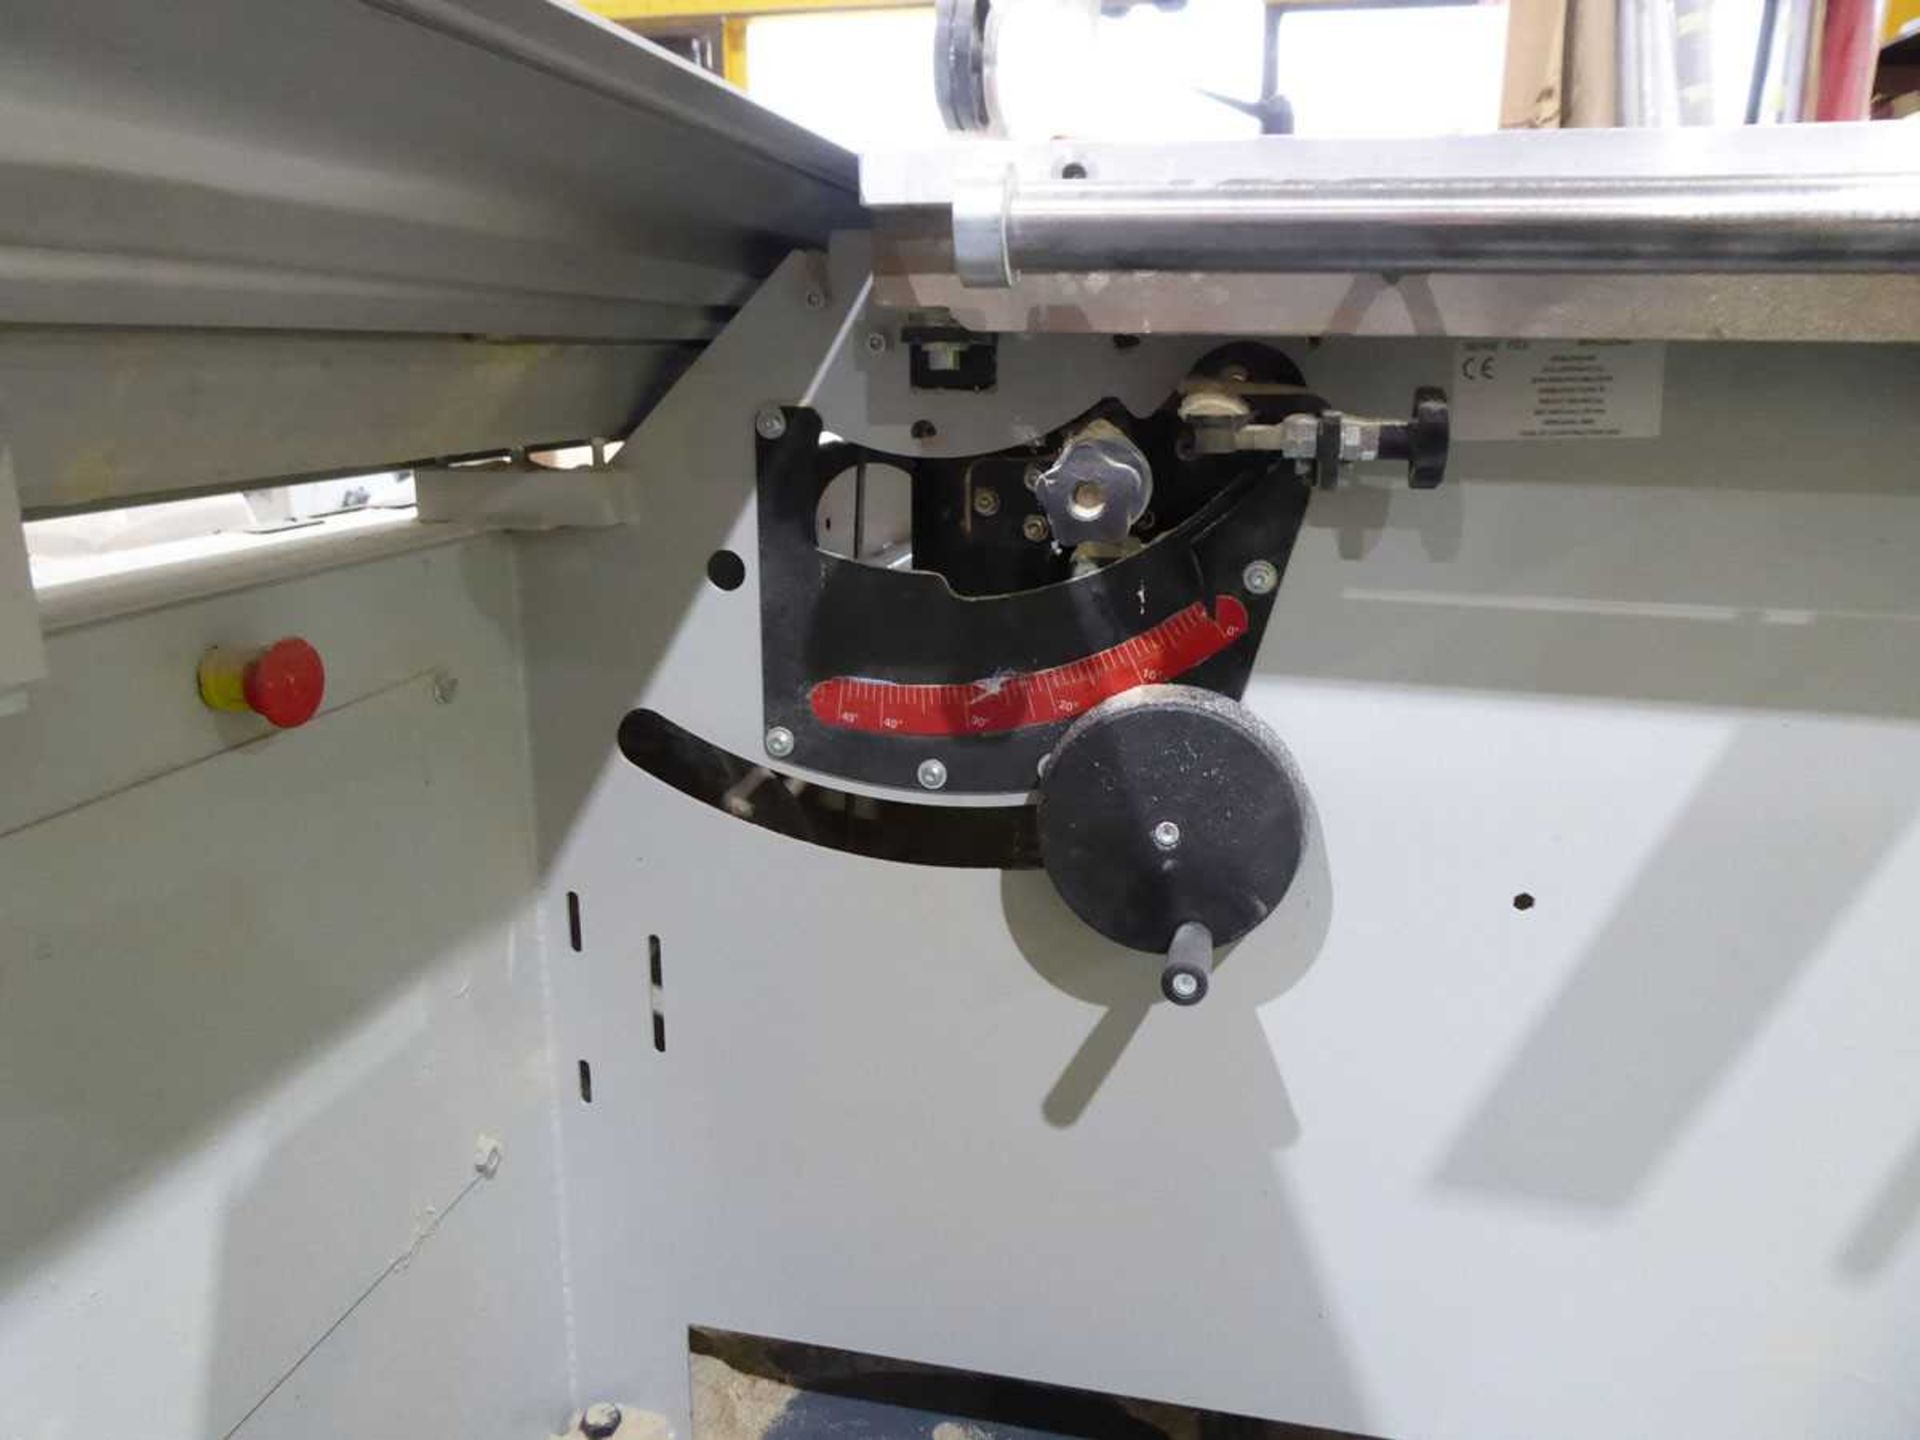 +VAT Robland FZ300 sliding table panel saw, serial no. 26KL22556, year 2020 - Image 3 of 7